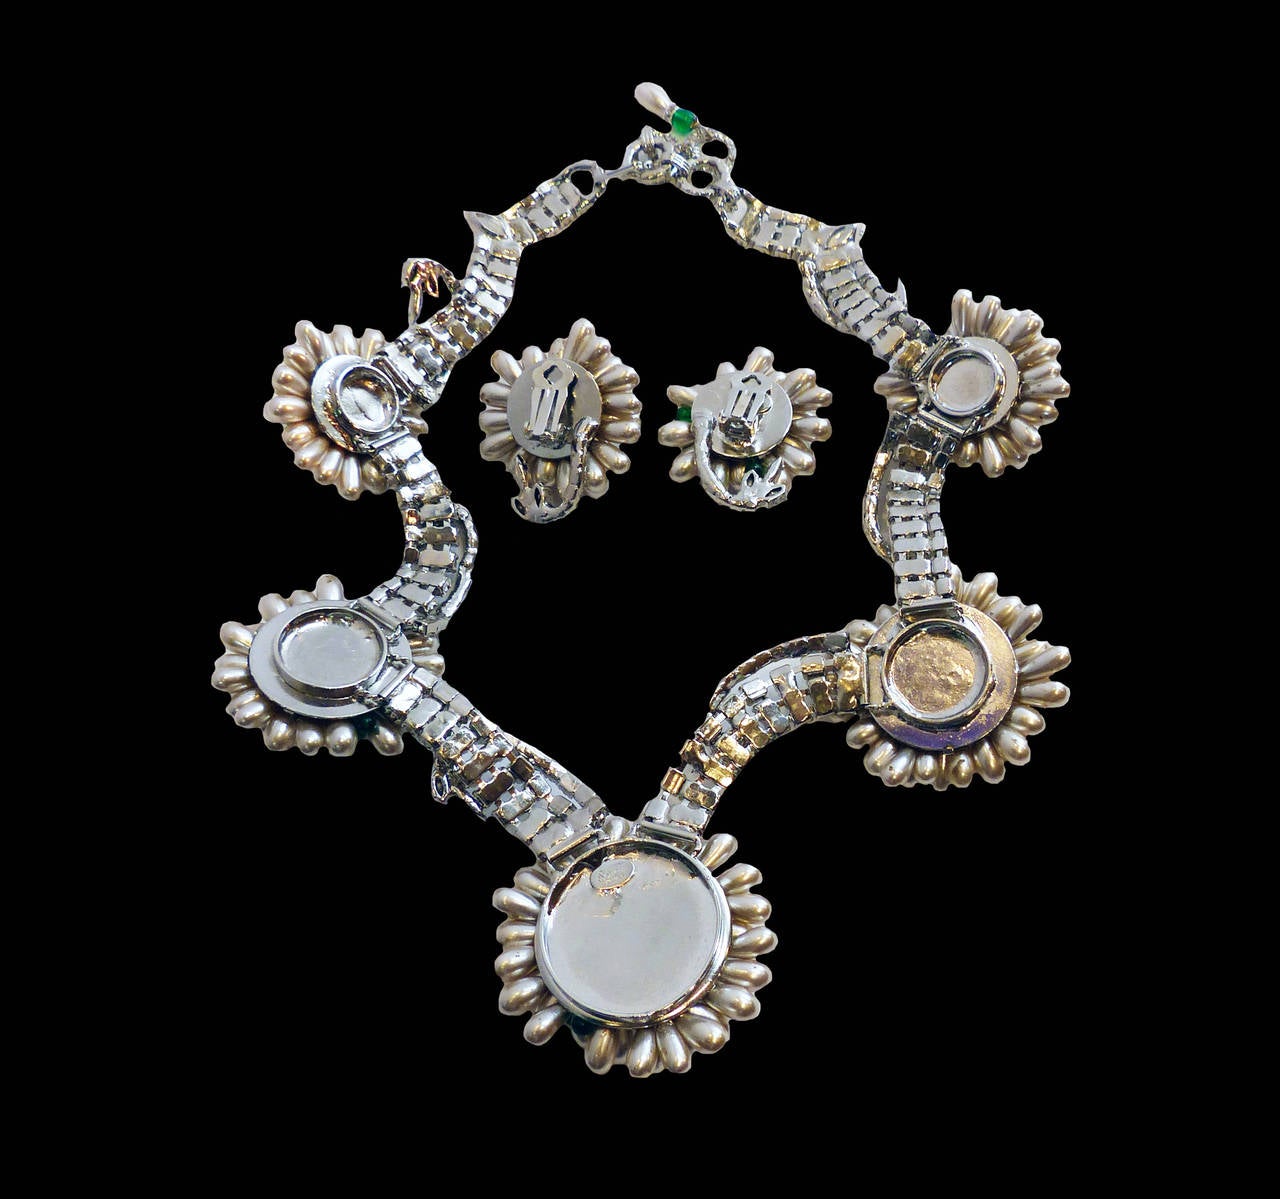 This one-of-a-kind set by Robert Sorrell features faux pearls with green glass beads and clear crystals accents in a silver-tone setting.  The necklace measures 17 ½” long with a hook closure; the centerpiece is 2 ¼” in diameter.  The clip earrings